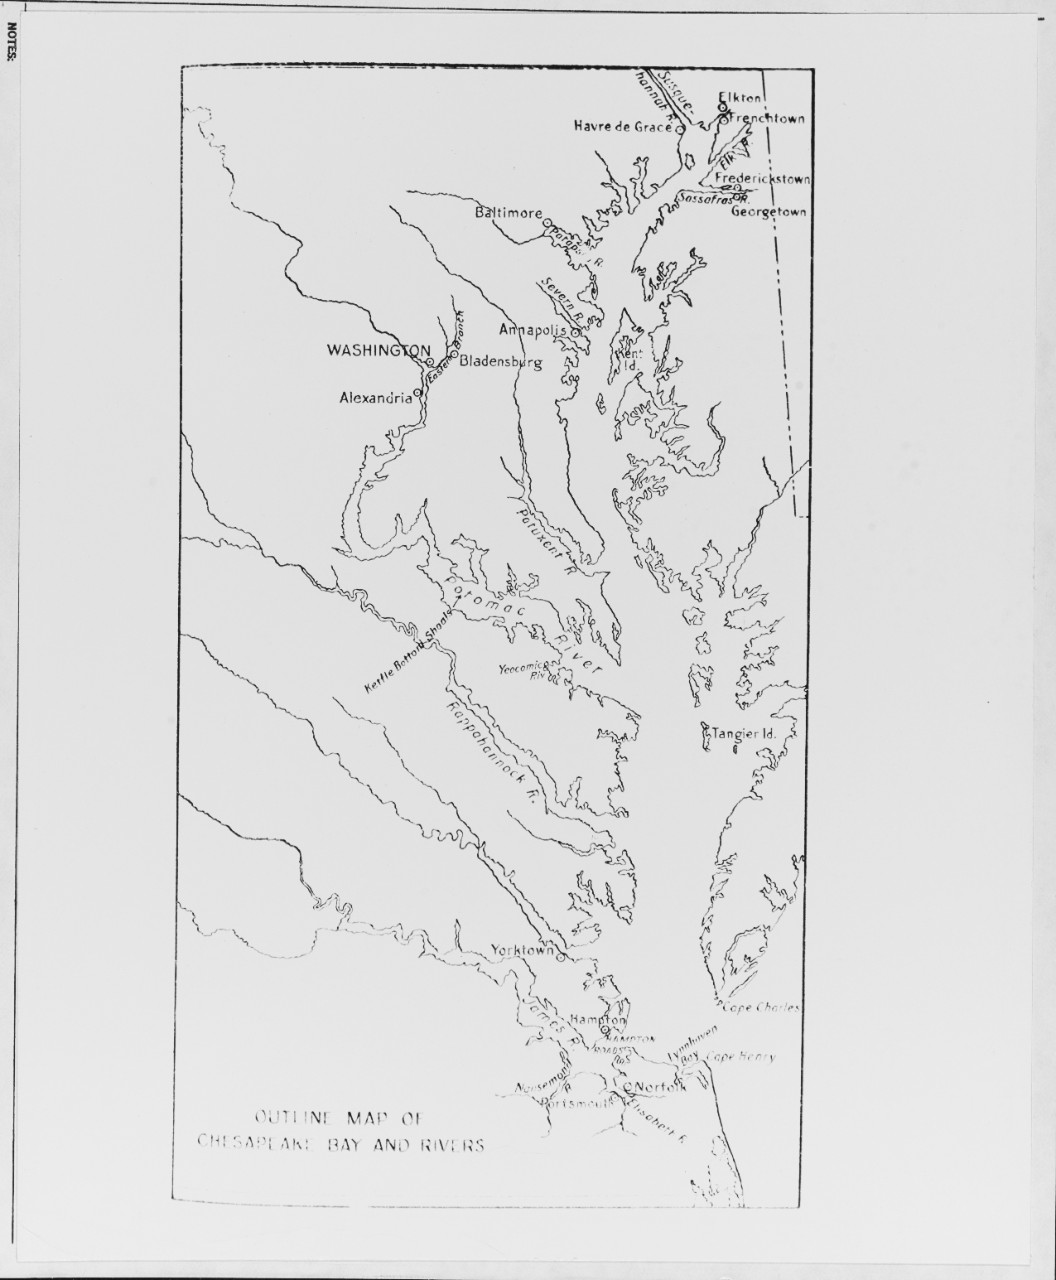 Outline Map of Chesapeake Bay and Rivers